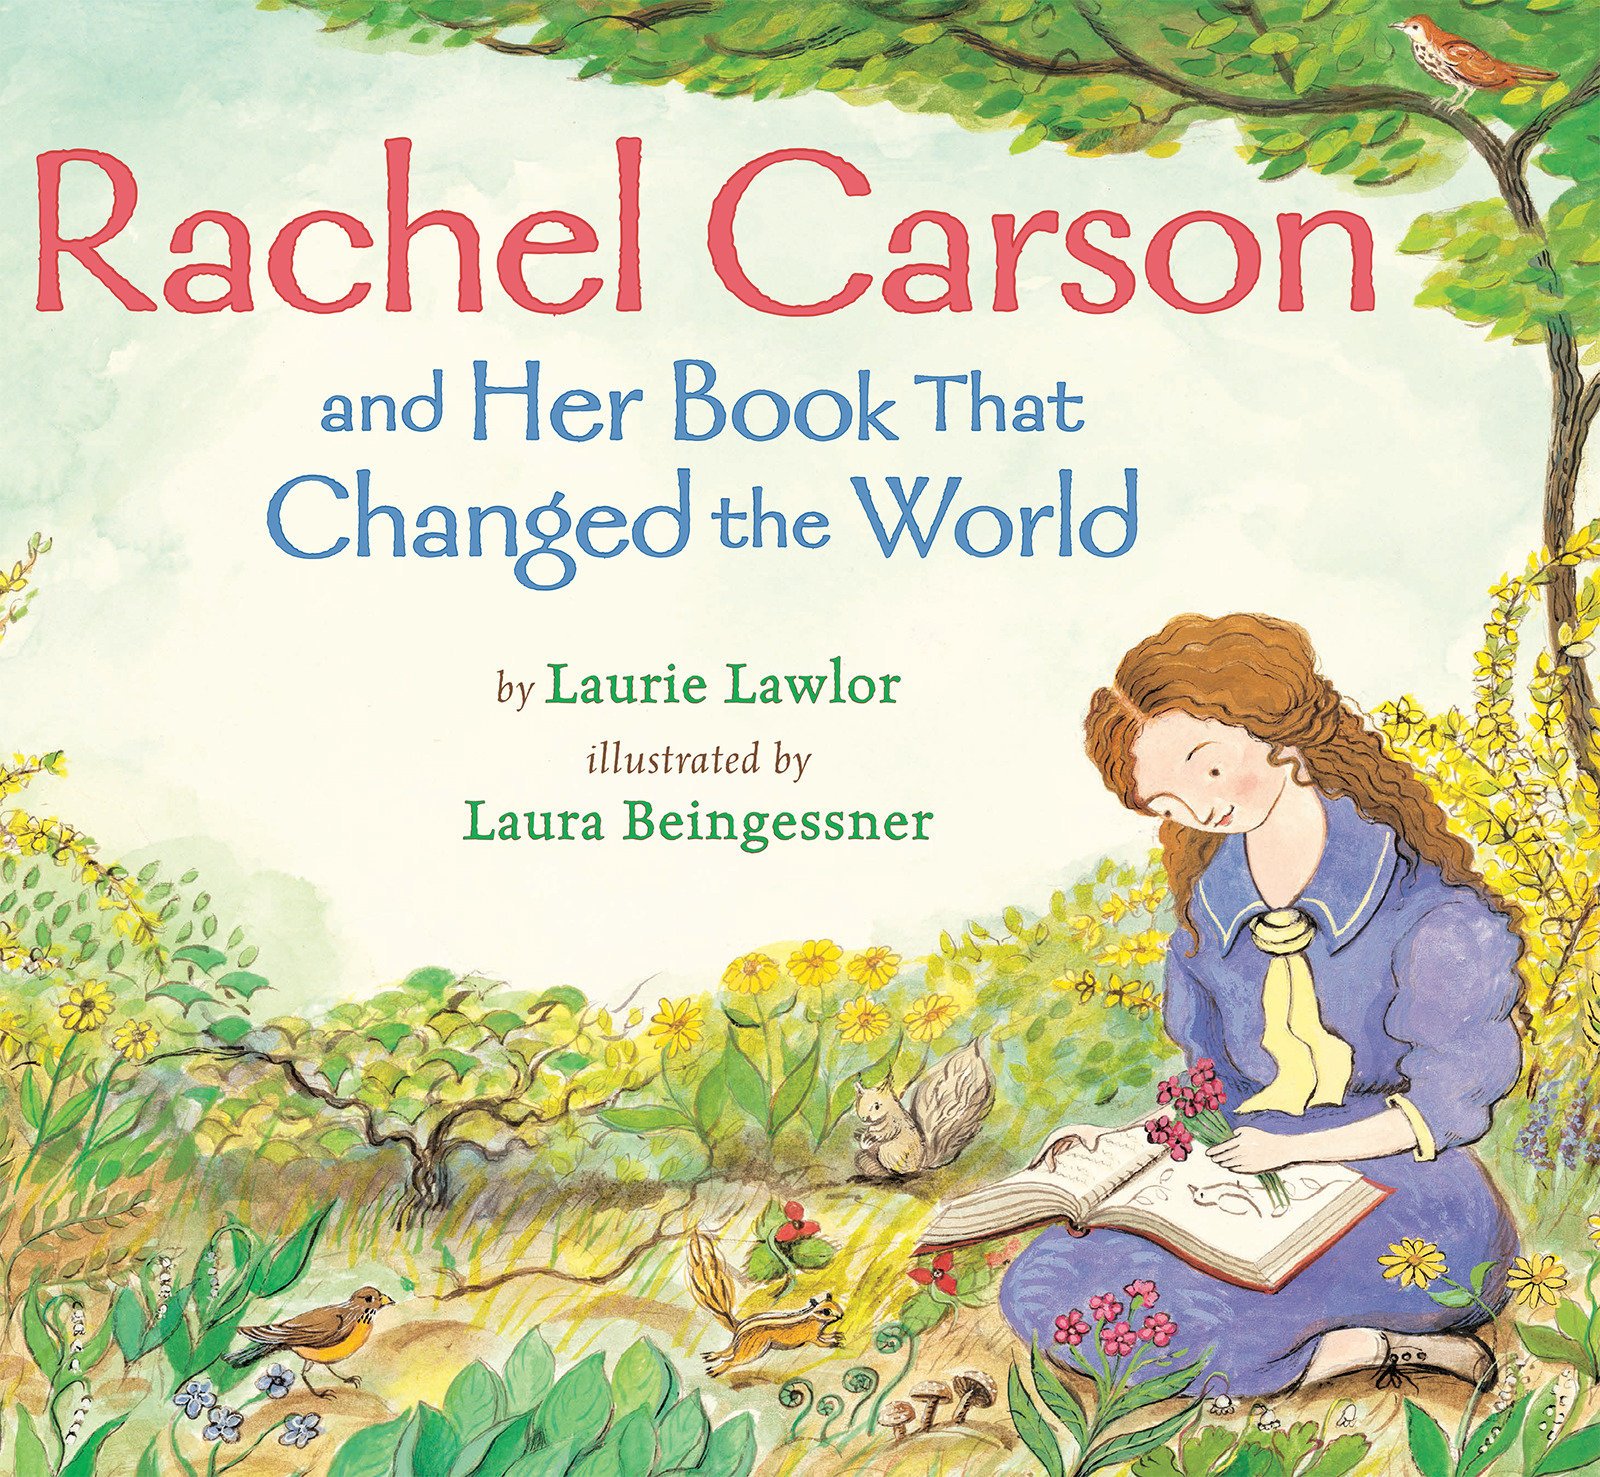 Rachel Carson and Her Book That Changed the World, by Laurie Lawlor